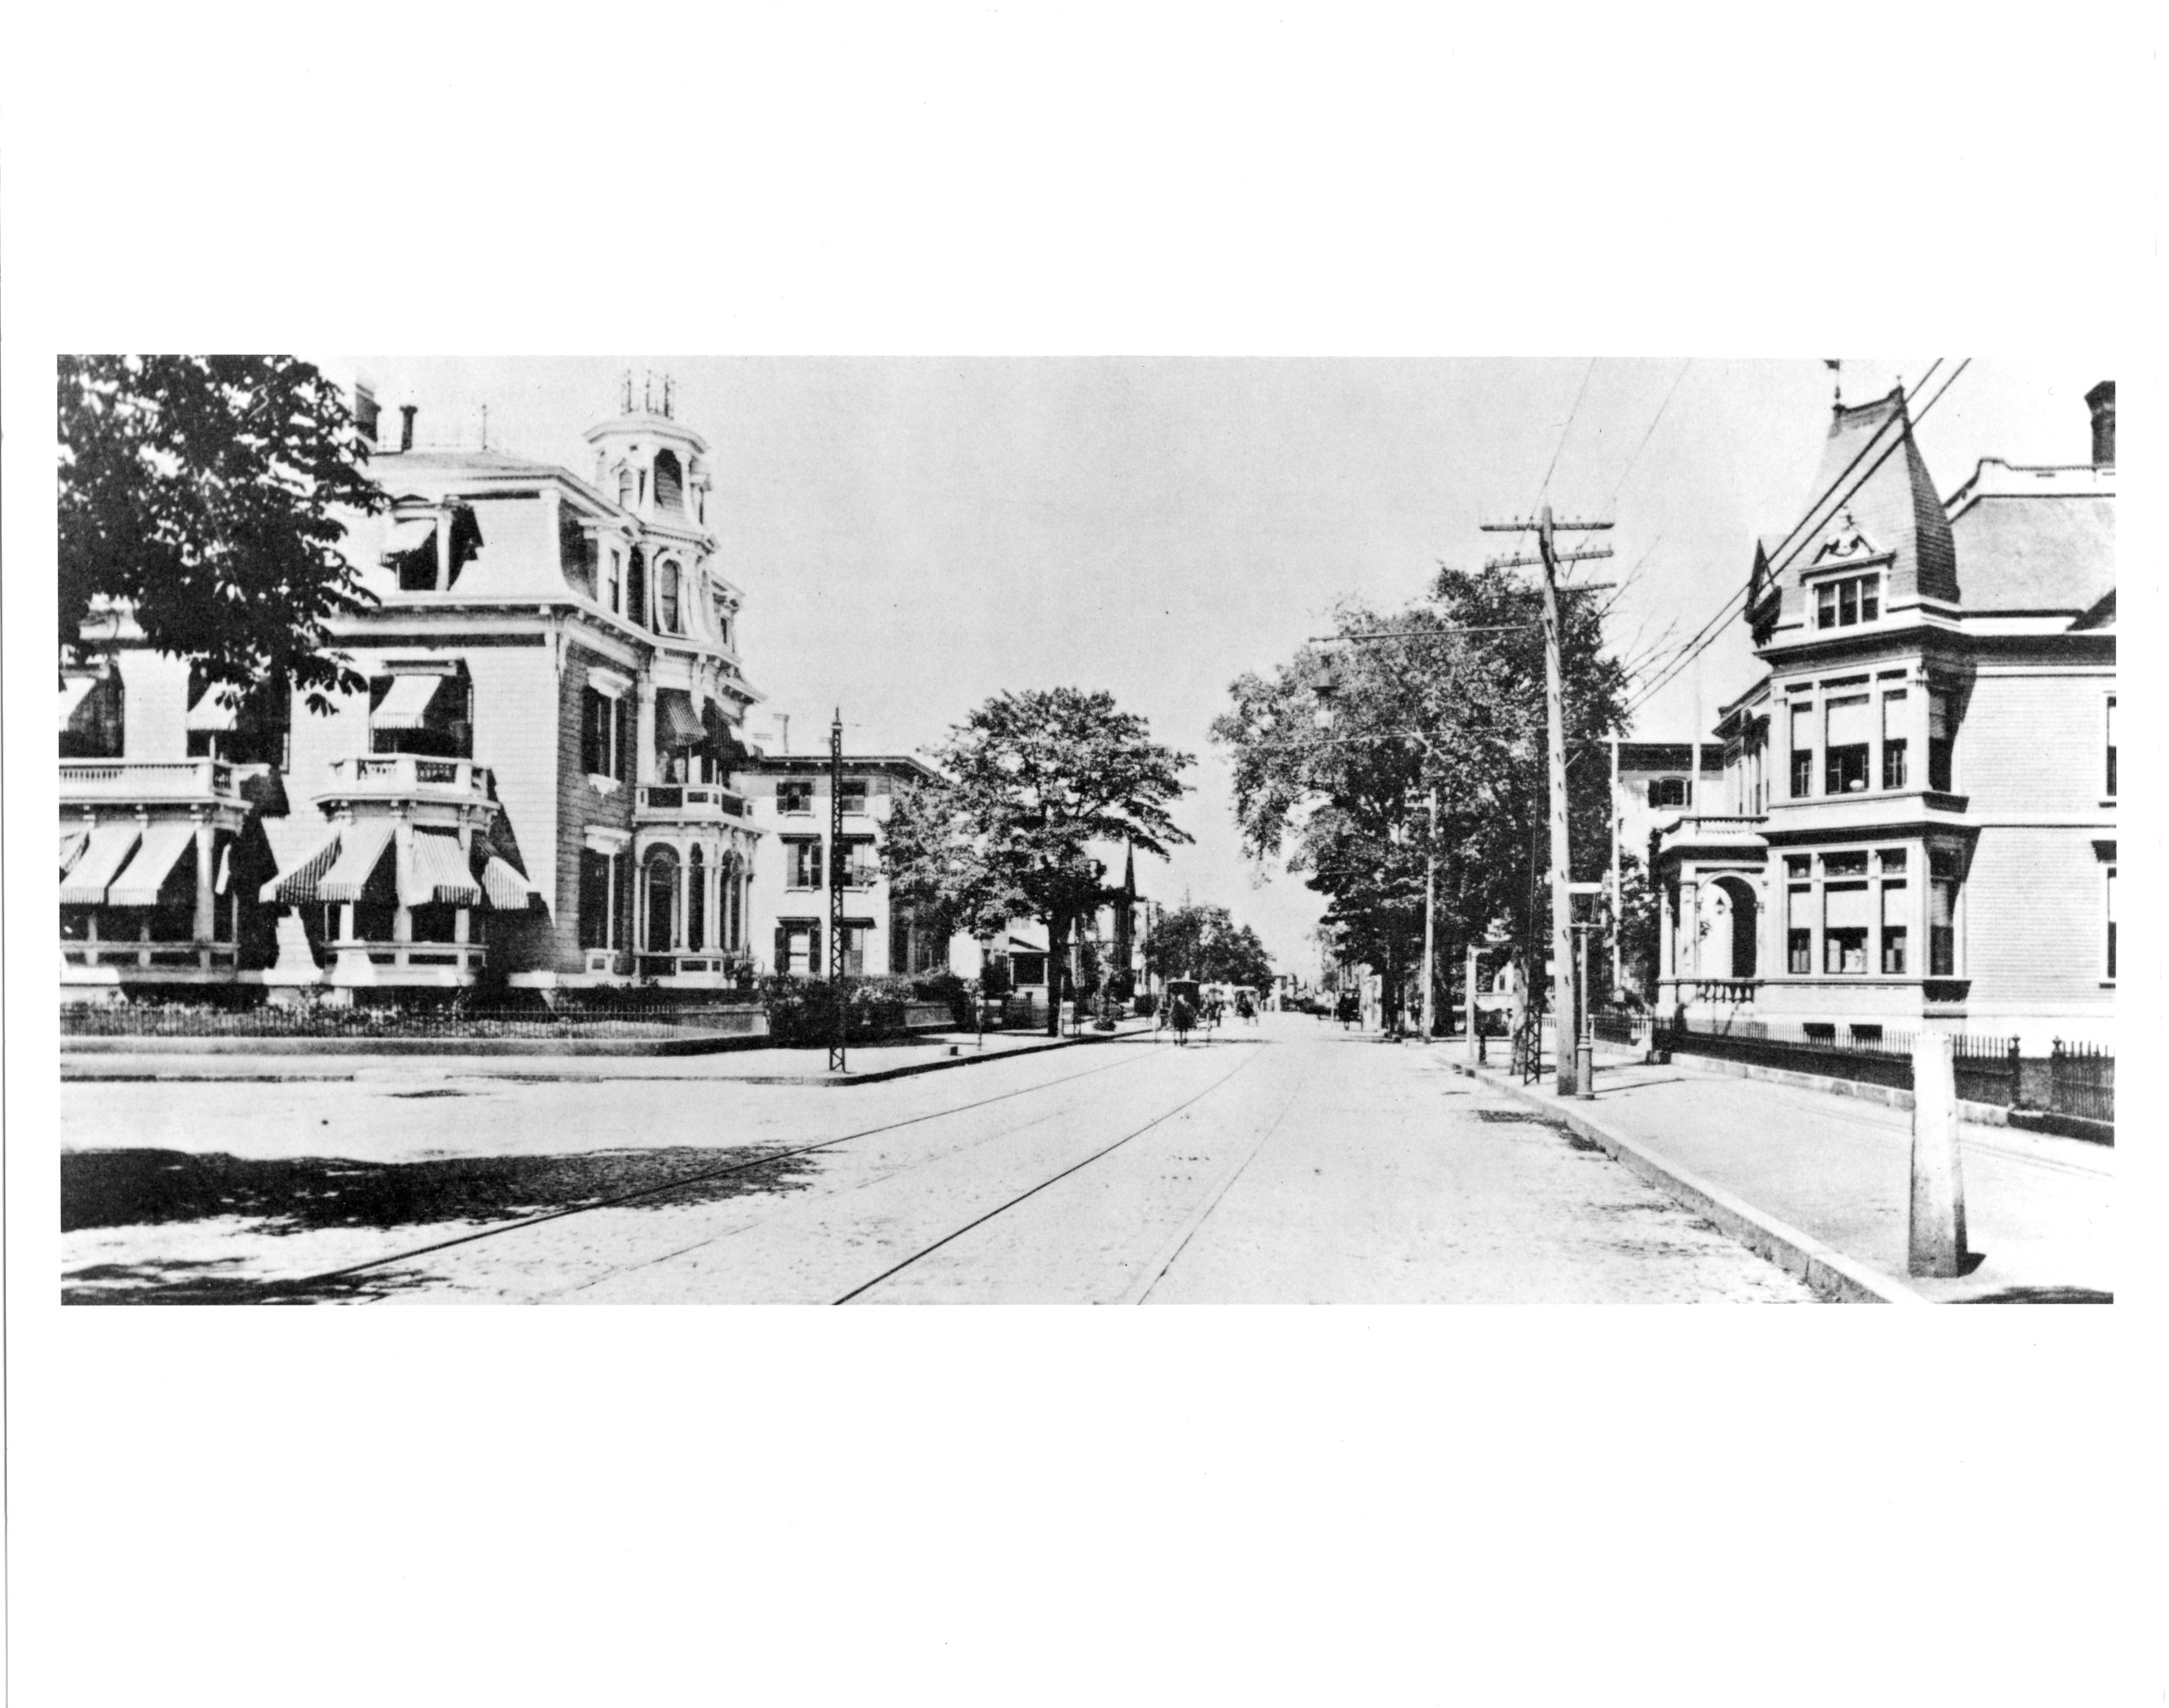  Westminster Street, West End, circa 1900. The first streetcar line was constructed in 1865 on Westminster Street from downtown to Olneyville. Tracks can be seen in this photo. 